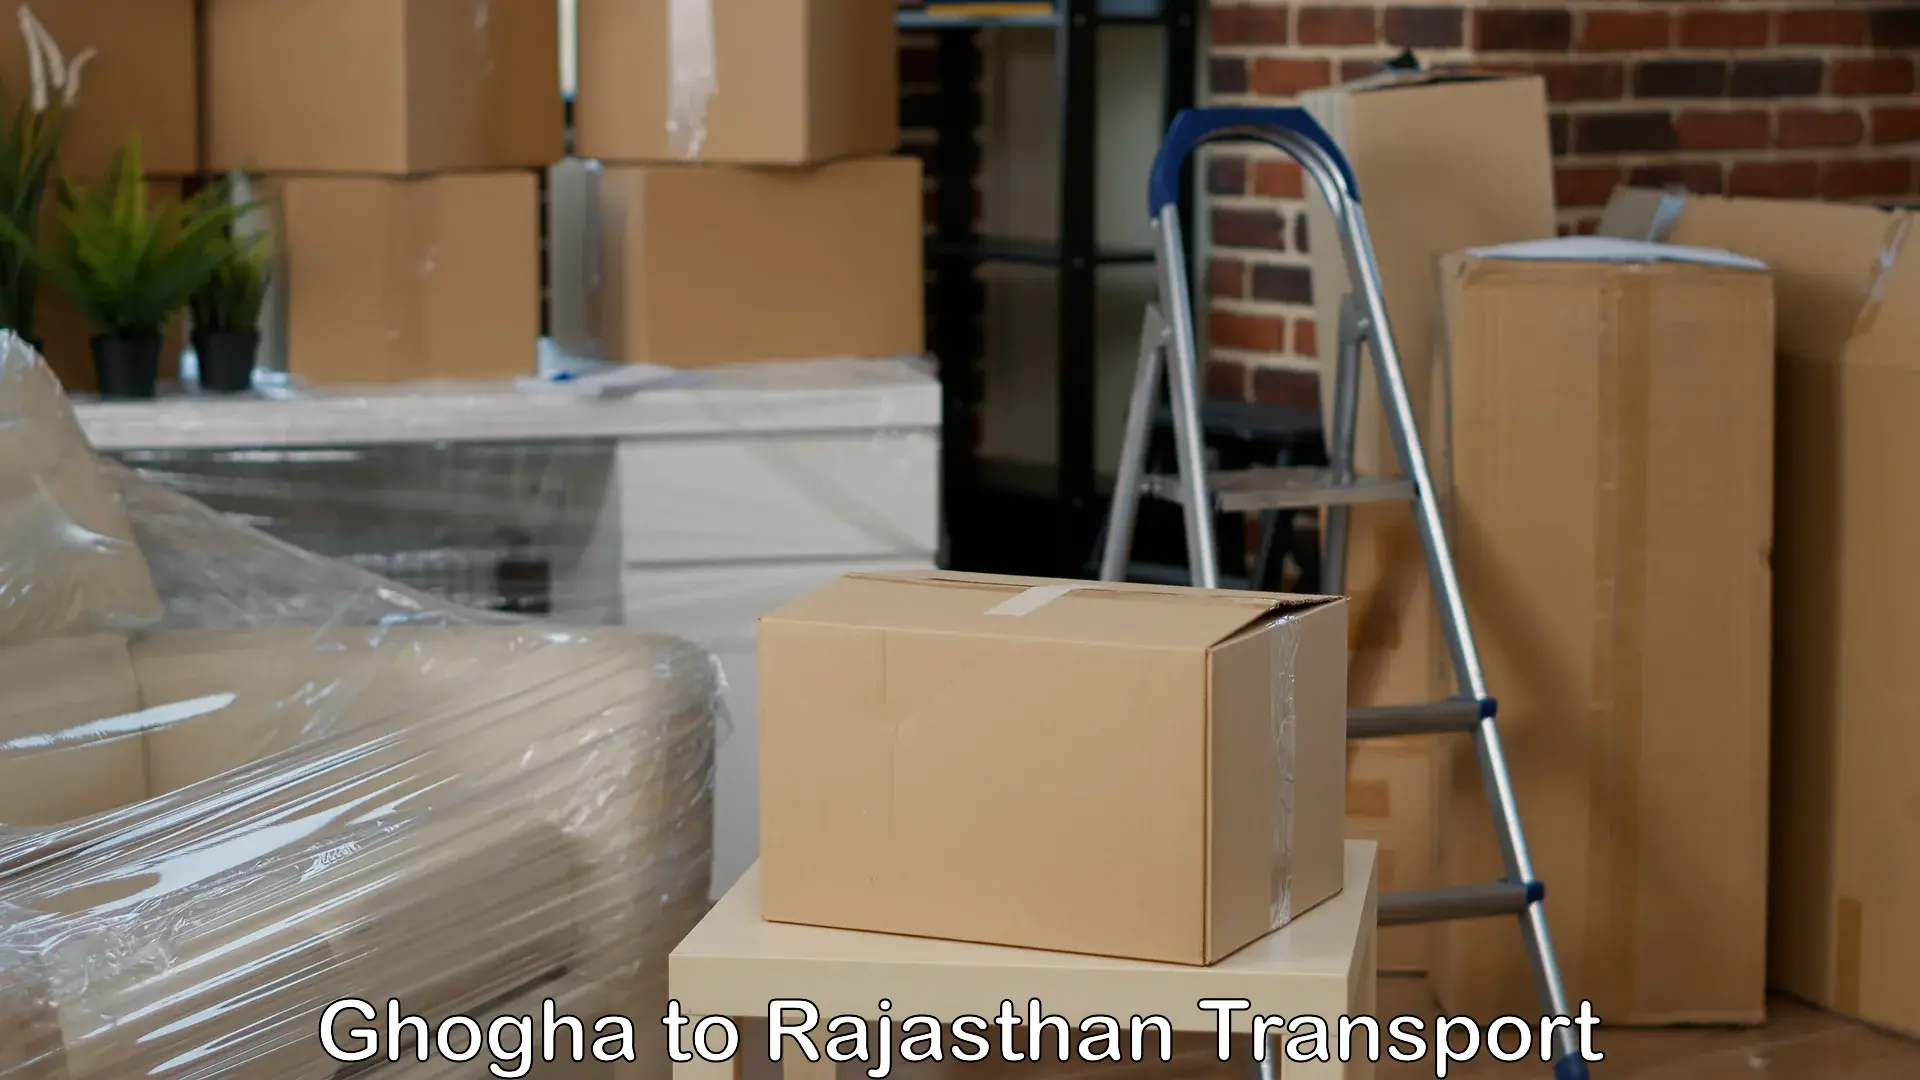 Domestic goods transportation services Ghogha to Nainwa